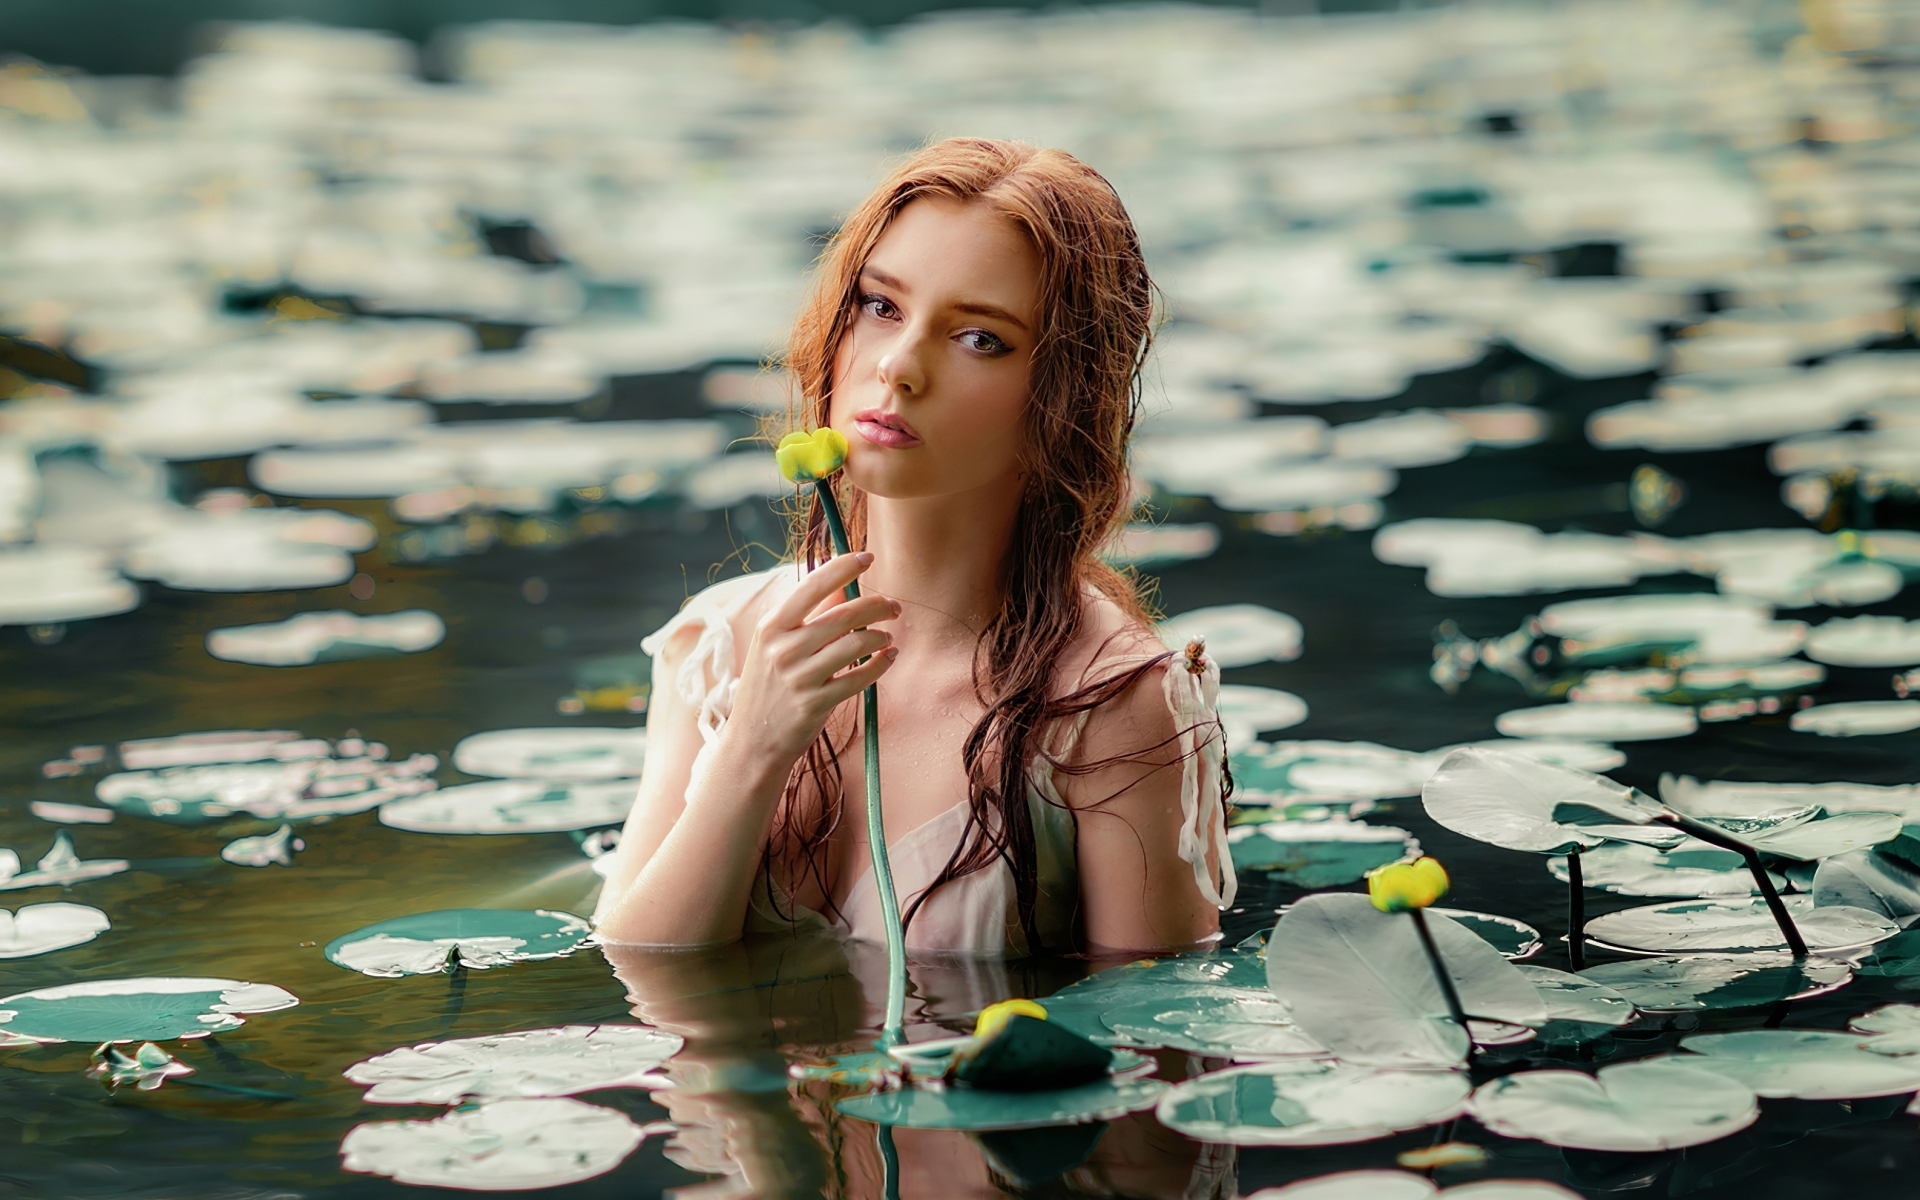 Download girl with flowers, outdoor, lake 1920x1200 wallpaper, 16:10